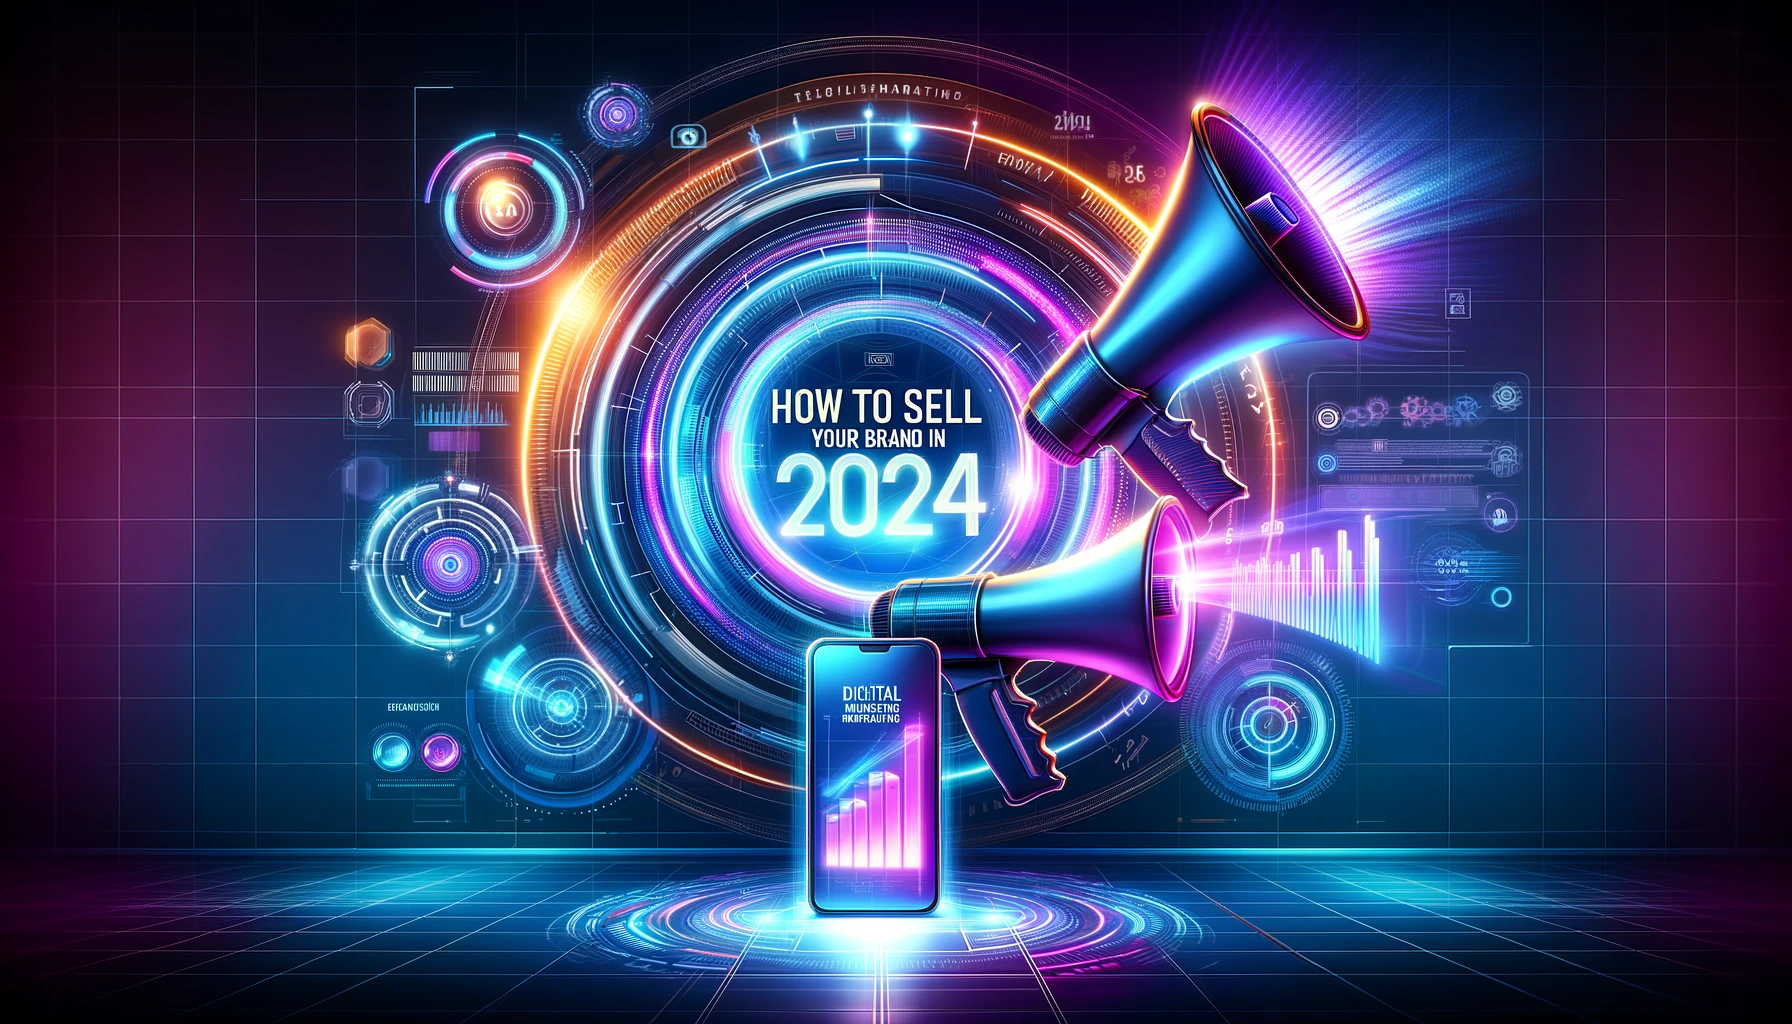 How To Sell Your Brand in 2024